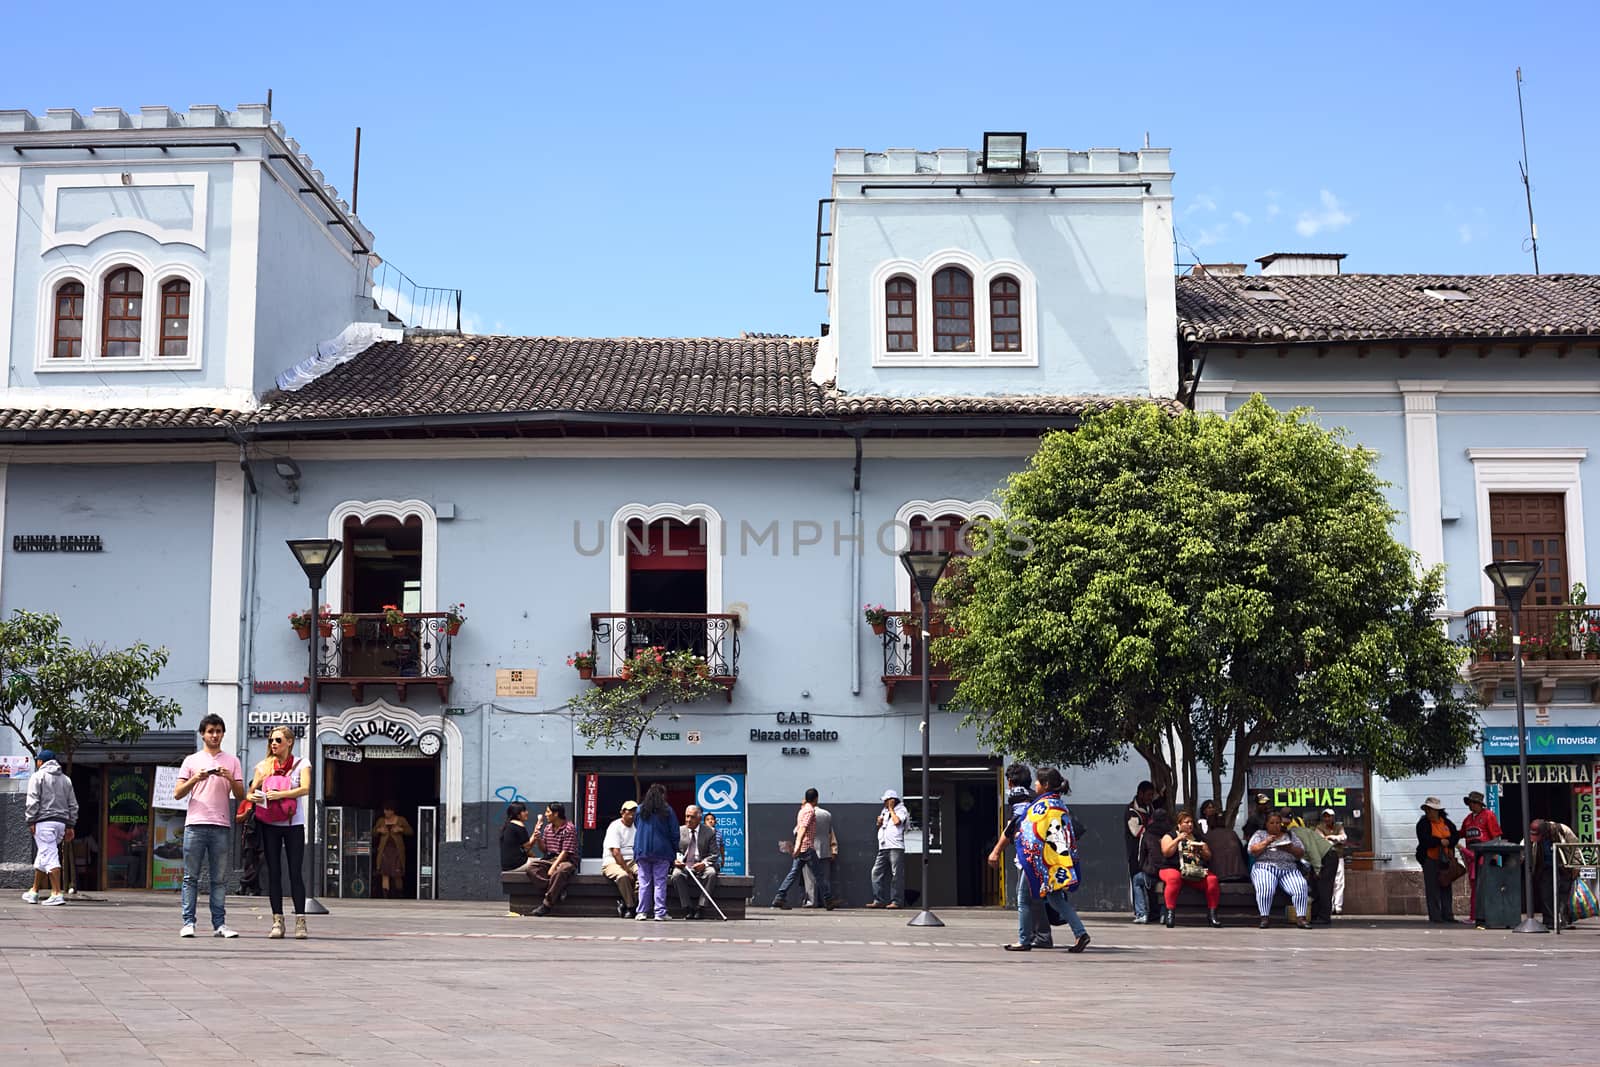 QUITO, ECUADOR - AUGUST 4, 2014: Unidentified people on Plaza del Teatro opposite the Sucre National Theater in the historic city center on August 4, 2014 in Quito, Ecuador. Quito is an UNESCO World Cultural Heritage Site. 